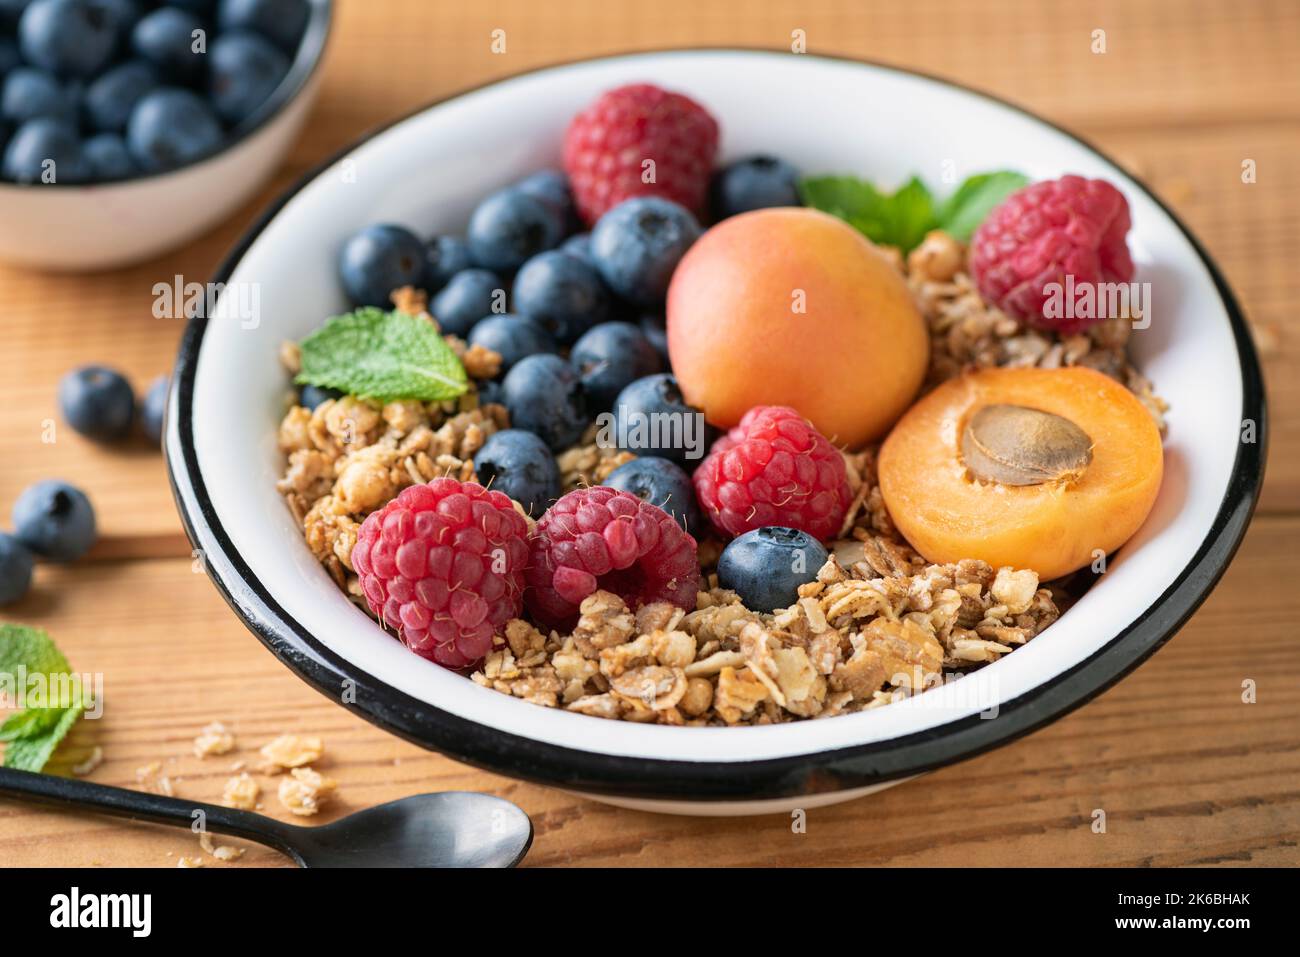 Crunchy oat honey granola with berries and fruits in bowl over wooden table background, closeup view Stock Photo